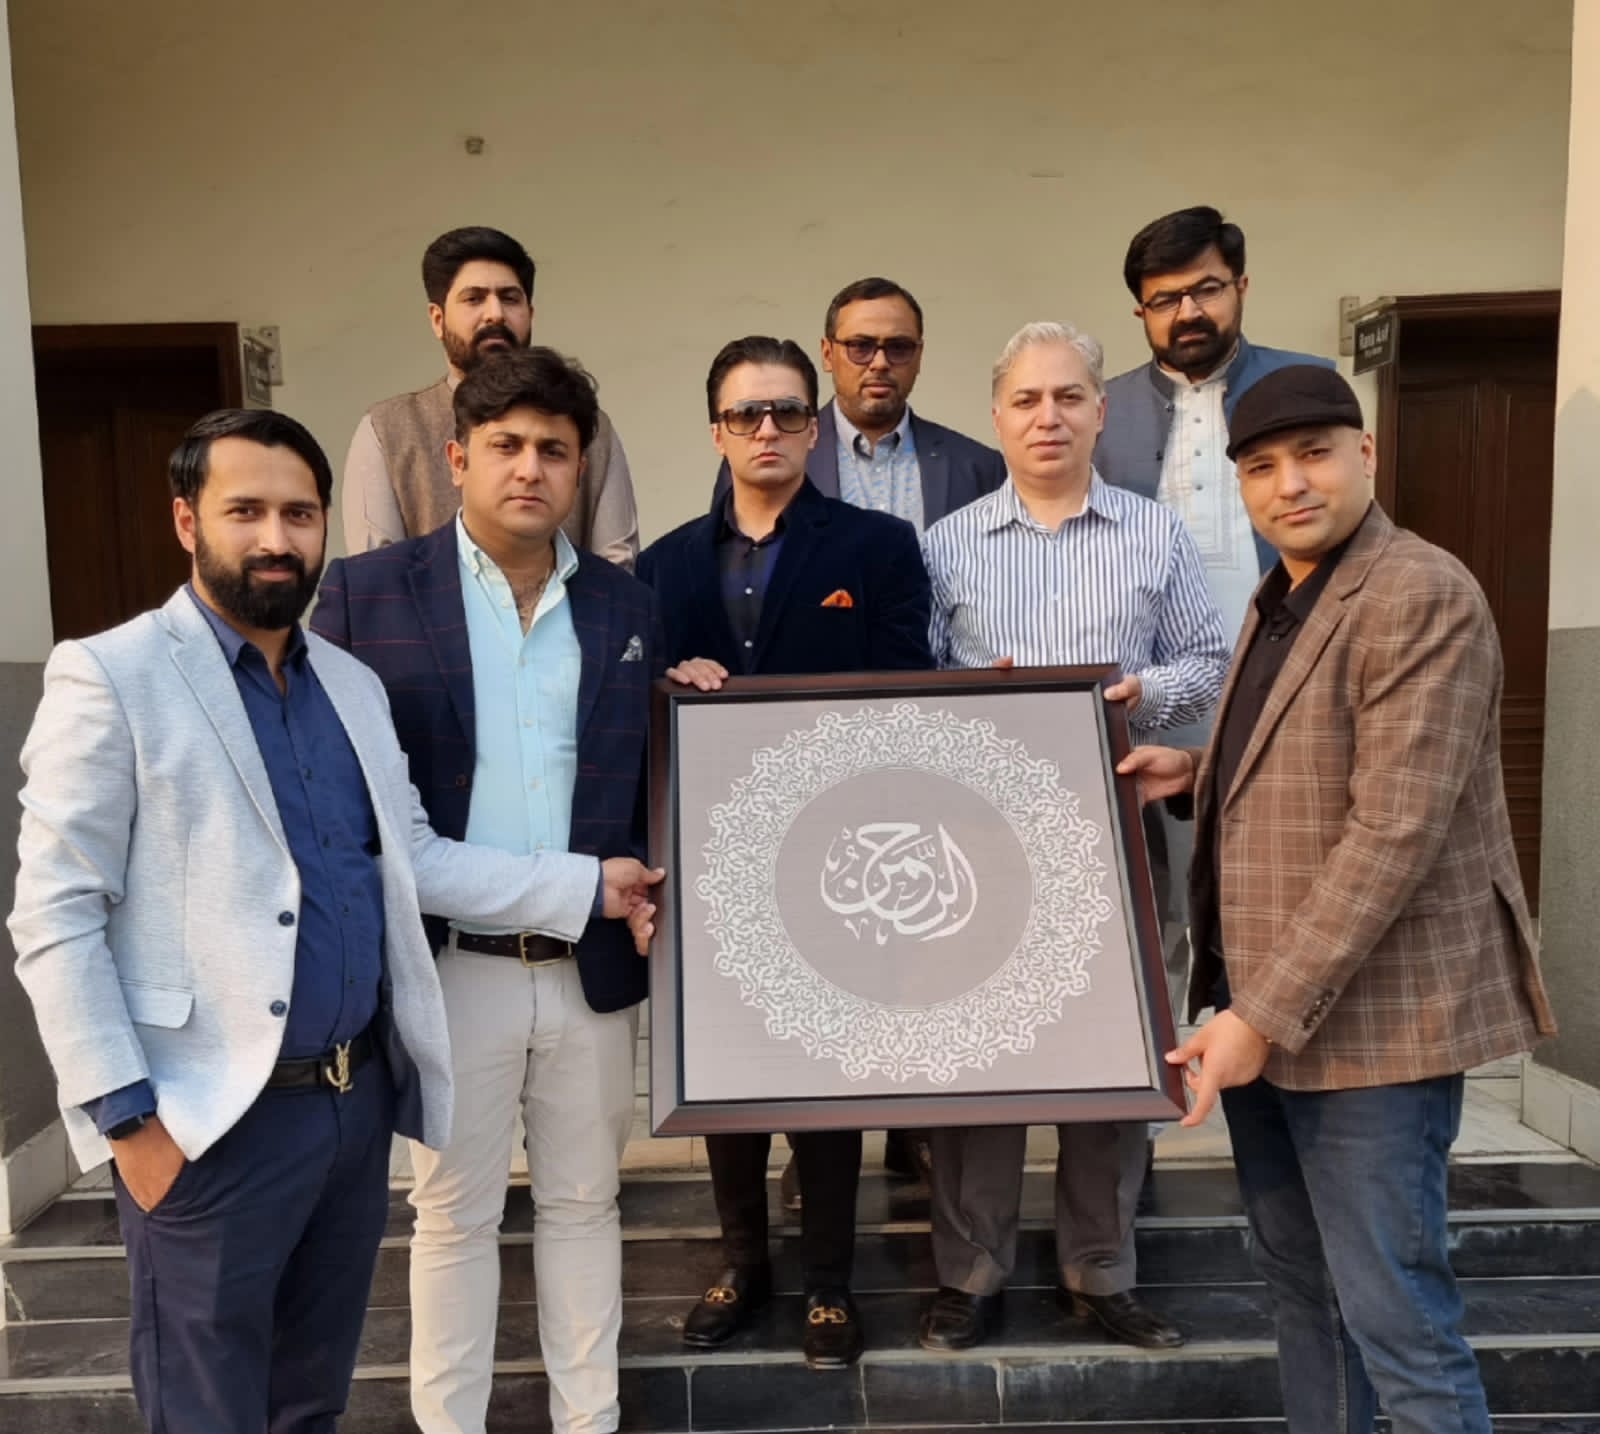 On November 18, 2021, A delegation of Sialkot Chamber of Commerce & Industry in the Leadership of Senior Vice President and Vice President, SCCI visited the National Textile University Faisalabad with the vision to bridge the gap between industry and Academia.   The delegates were briefed about role and impact of National Textile on the socio-economic development of the country in general and textile & clothing industry in particular, with an outstanding education, research, and eco-friendly innovation.  Senior Vice President addressed the faculty while stating that the Gap between Industry and Academia should be narrowed down, as innovation and research are vital elements of industrial growth which could only be achieved by collaboration of both bodies.